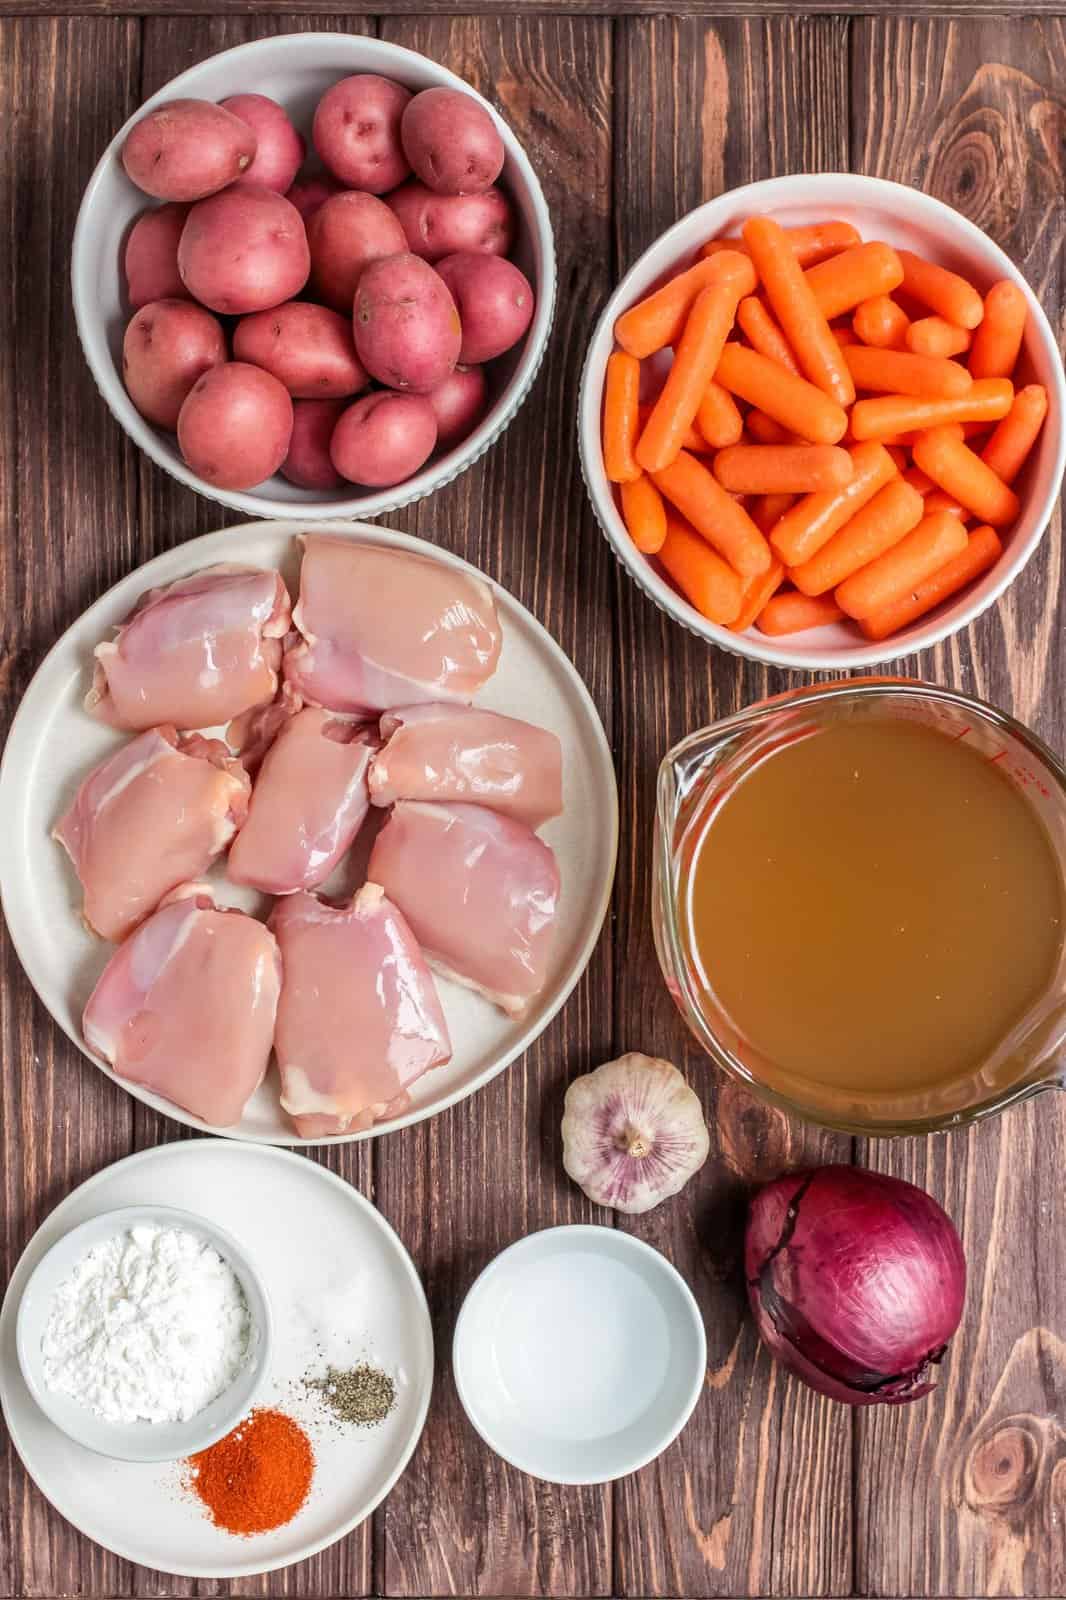 Ingredients needed: chicken thighs, paprika, salt, pepper, vegetable oil, baby red potatoes, baby carrots, red onion, garlic, chicken broth, cornstarch and water.